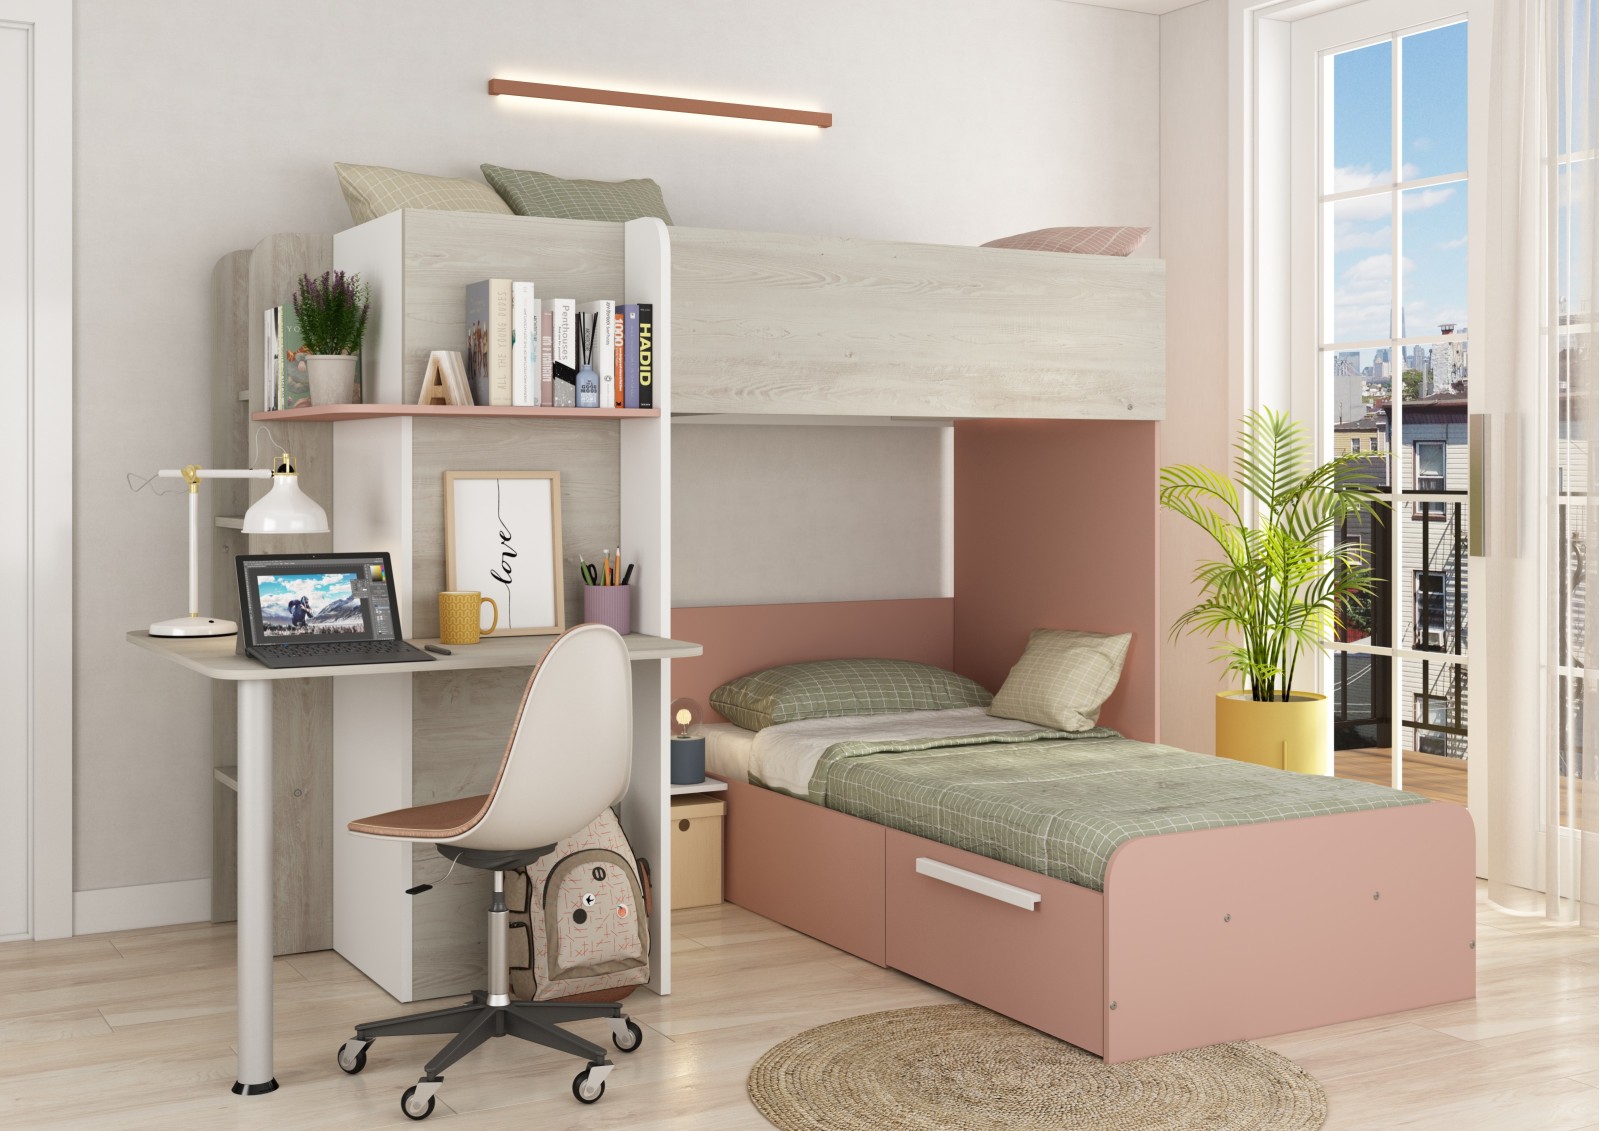 Bunkbed 90x190cm with desk, drawer and wardrobe.Palatino